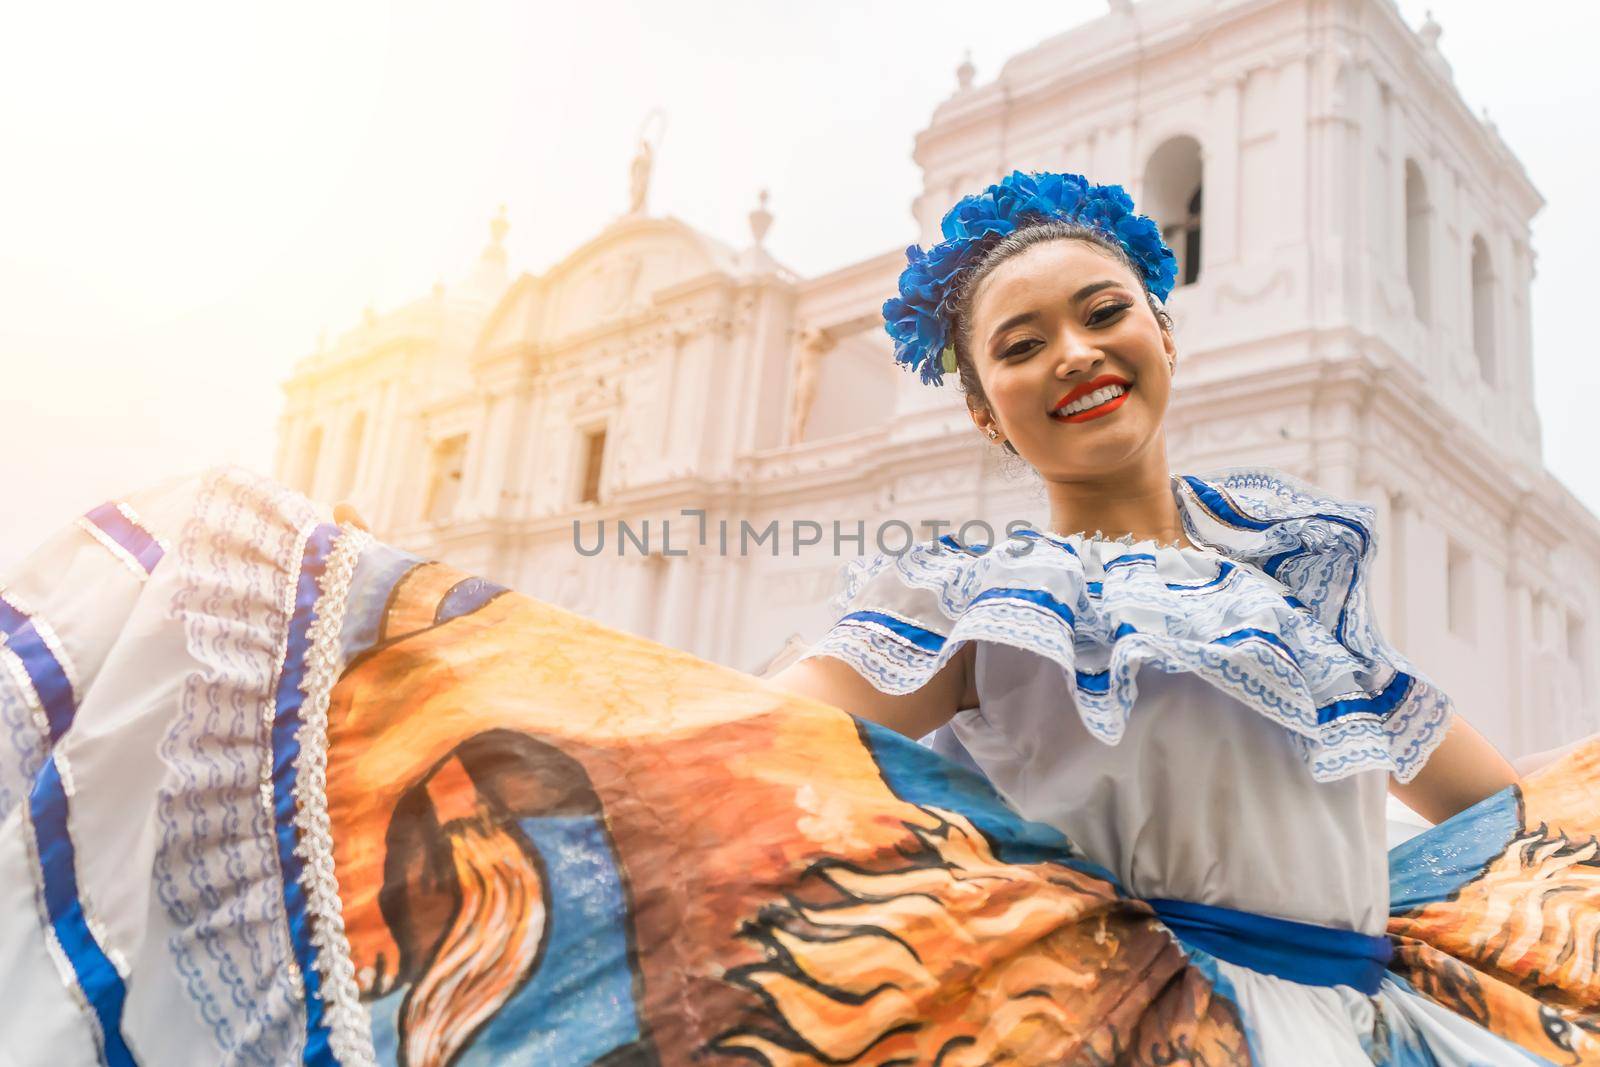 Nicaraguan folklore dancer smiling and looking at the camera outside the cathedral church in the central park of the city of Leon. The woman wears the typical dress of Central America and similar to countries of South America by cfalvarez